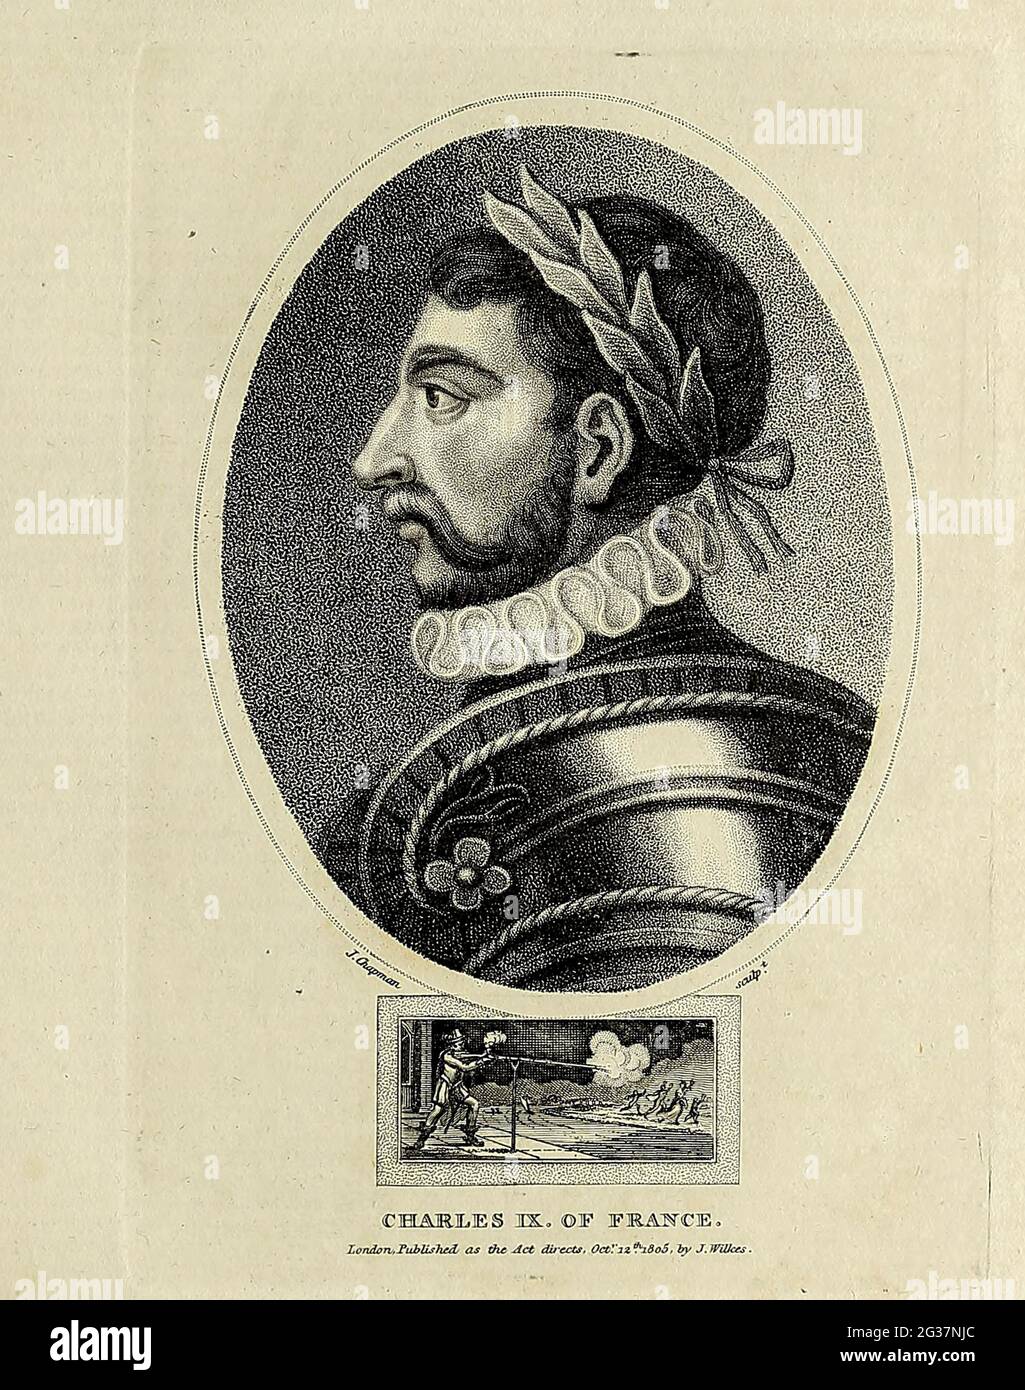 Charles IX (Charles Maximilien; 27 June 1550 – 30 May 1574) was King of France from 1560 until his death in 1574 from tuberculosis. He ascended the throne of France upon the death of his brother Francis II in 1560.  Copperplate engraving From the Encyclopaedia Londinensis or, Universal dictionary of arts, sciences, and literature; Volume VII;  Edited by Wilkes, John. Published in London in 1810 Stock Photo